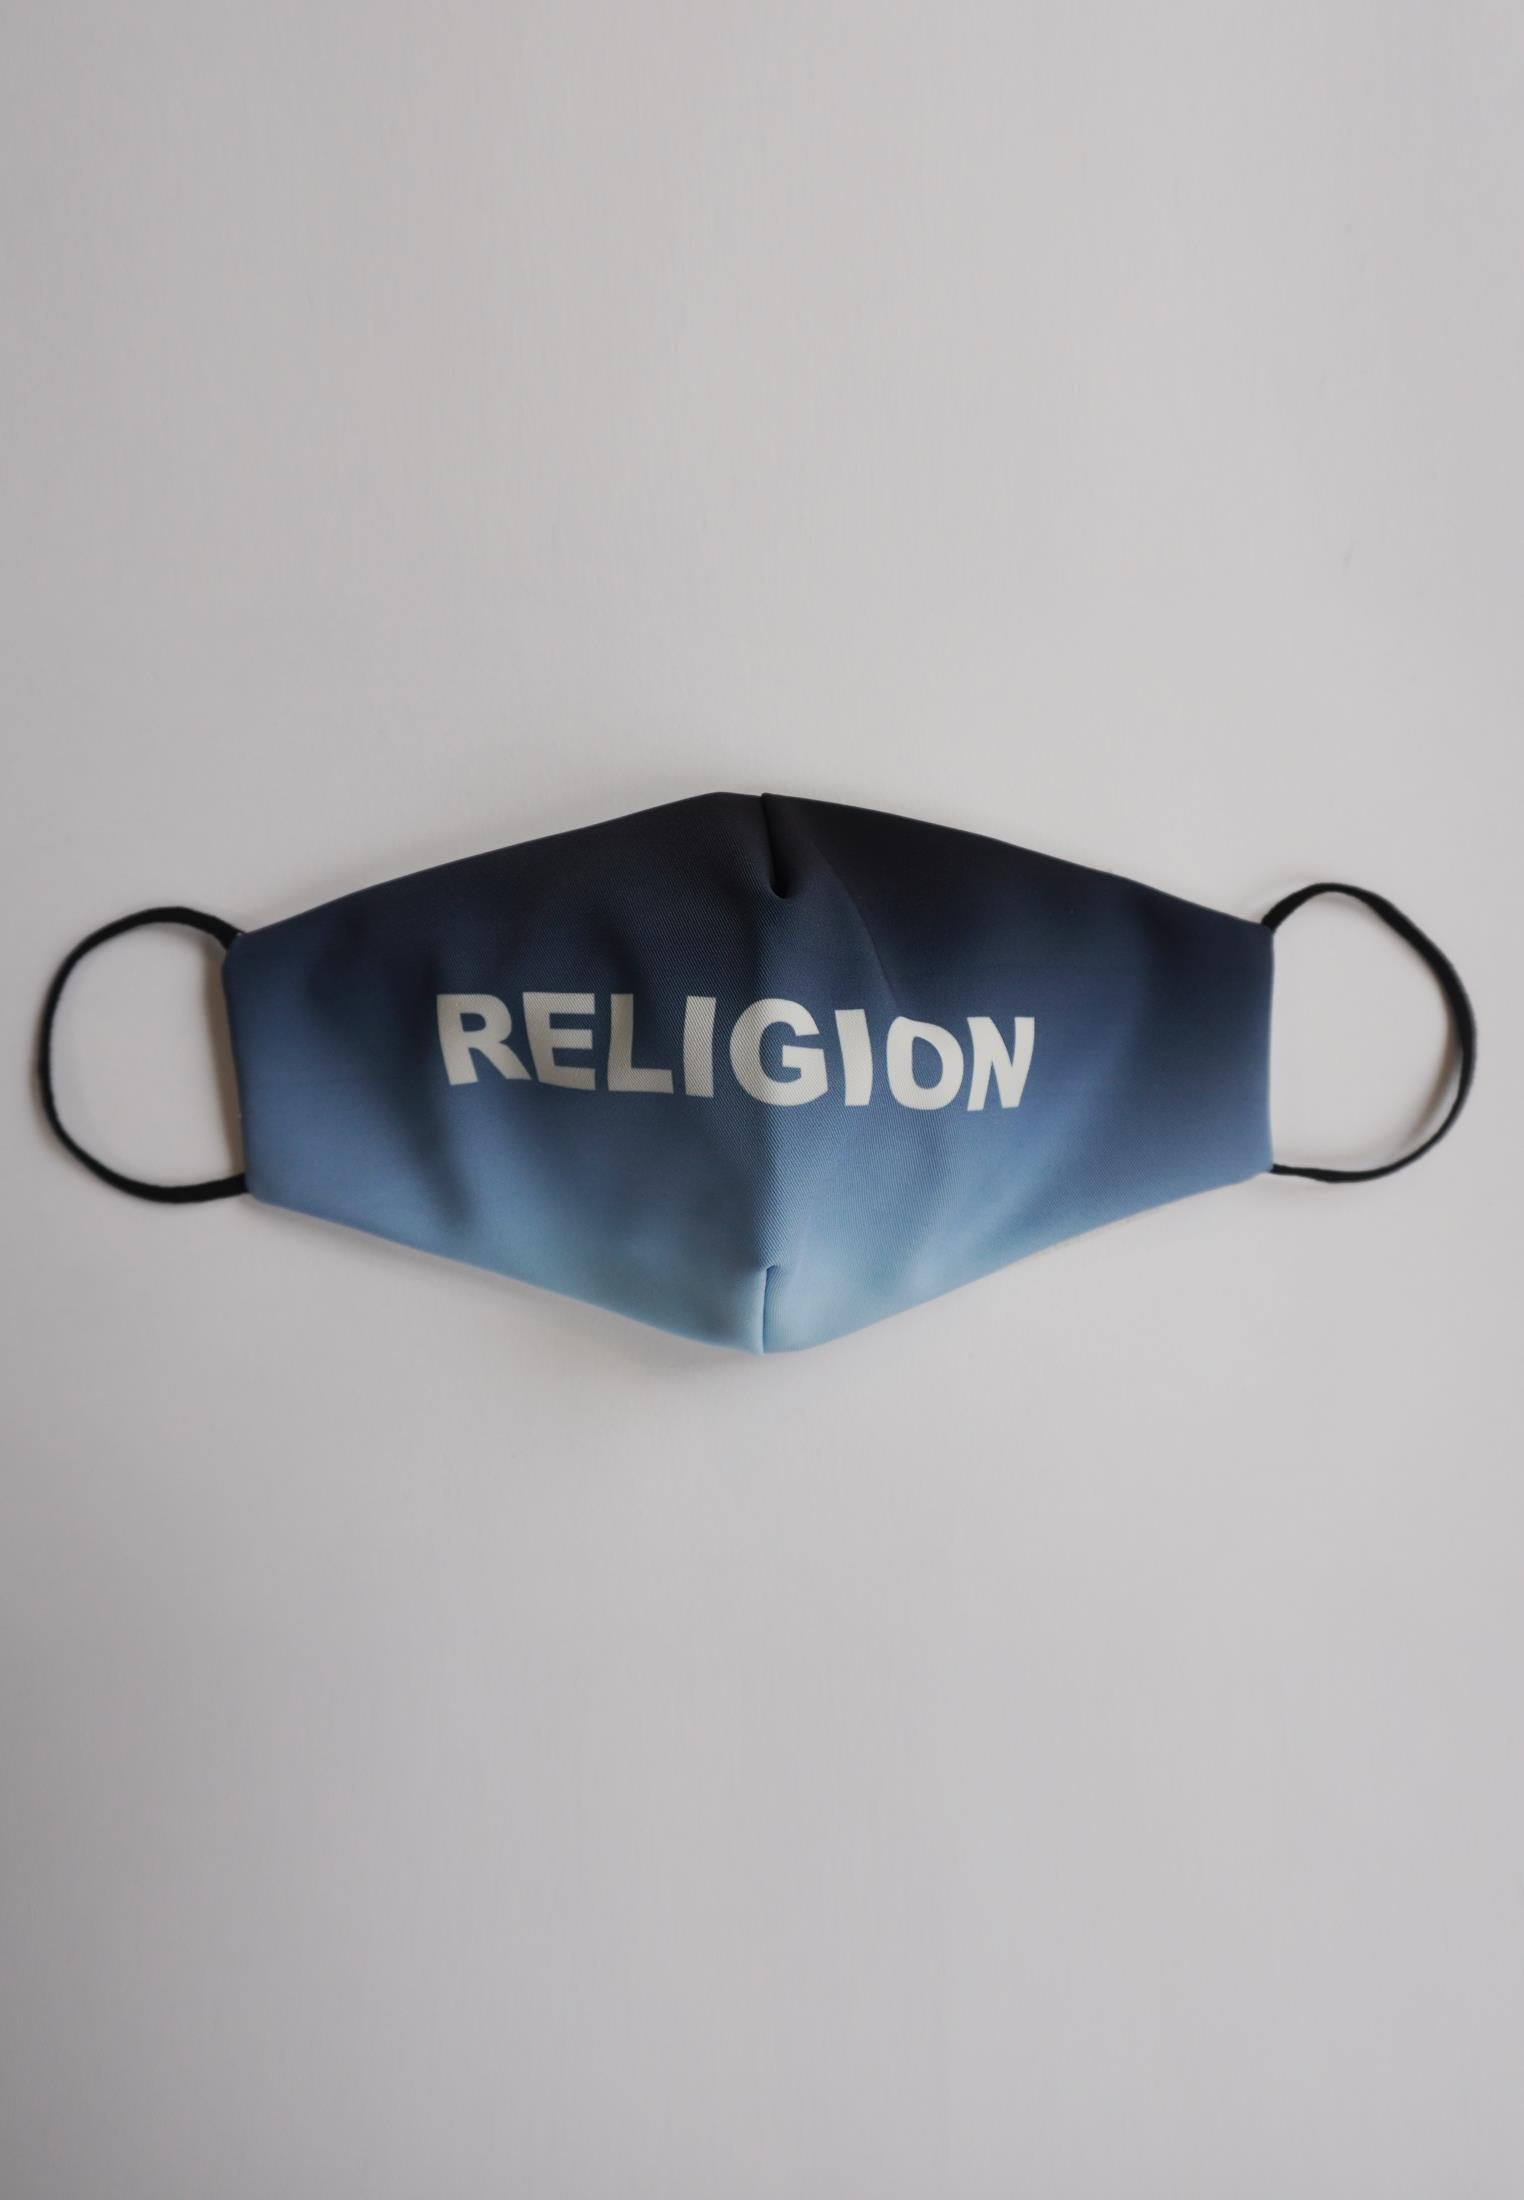 RELIGION Face Mask Gradient Baby Blue Print